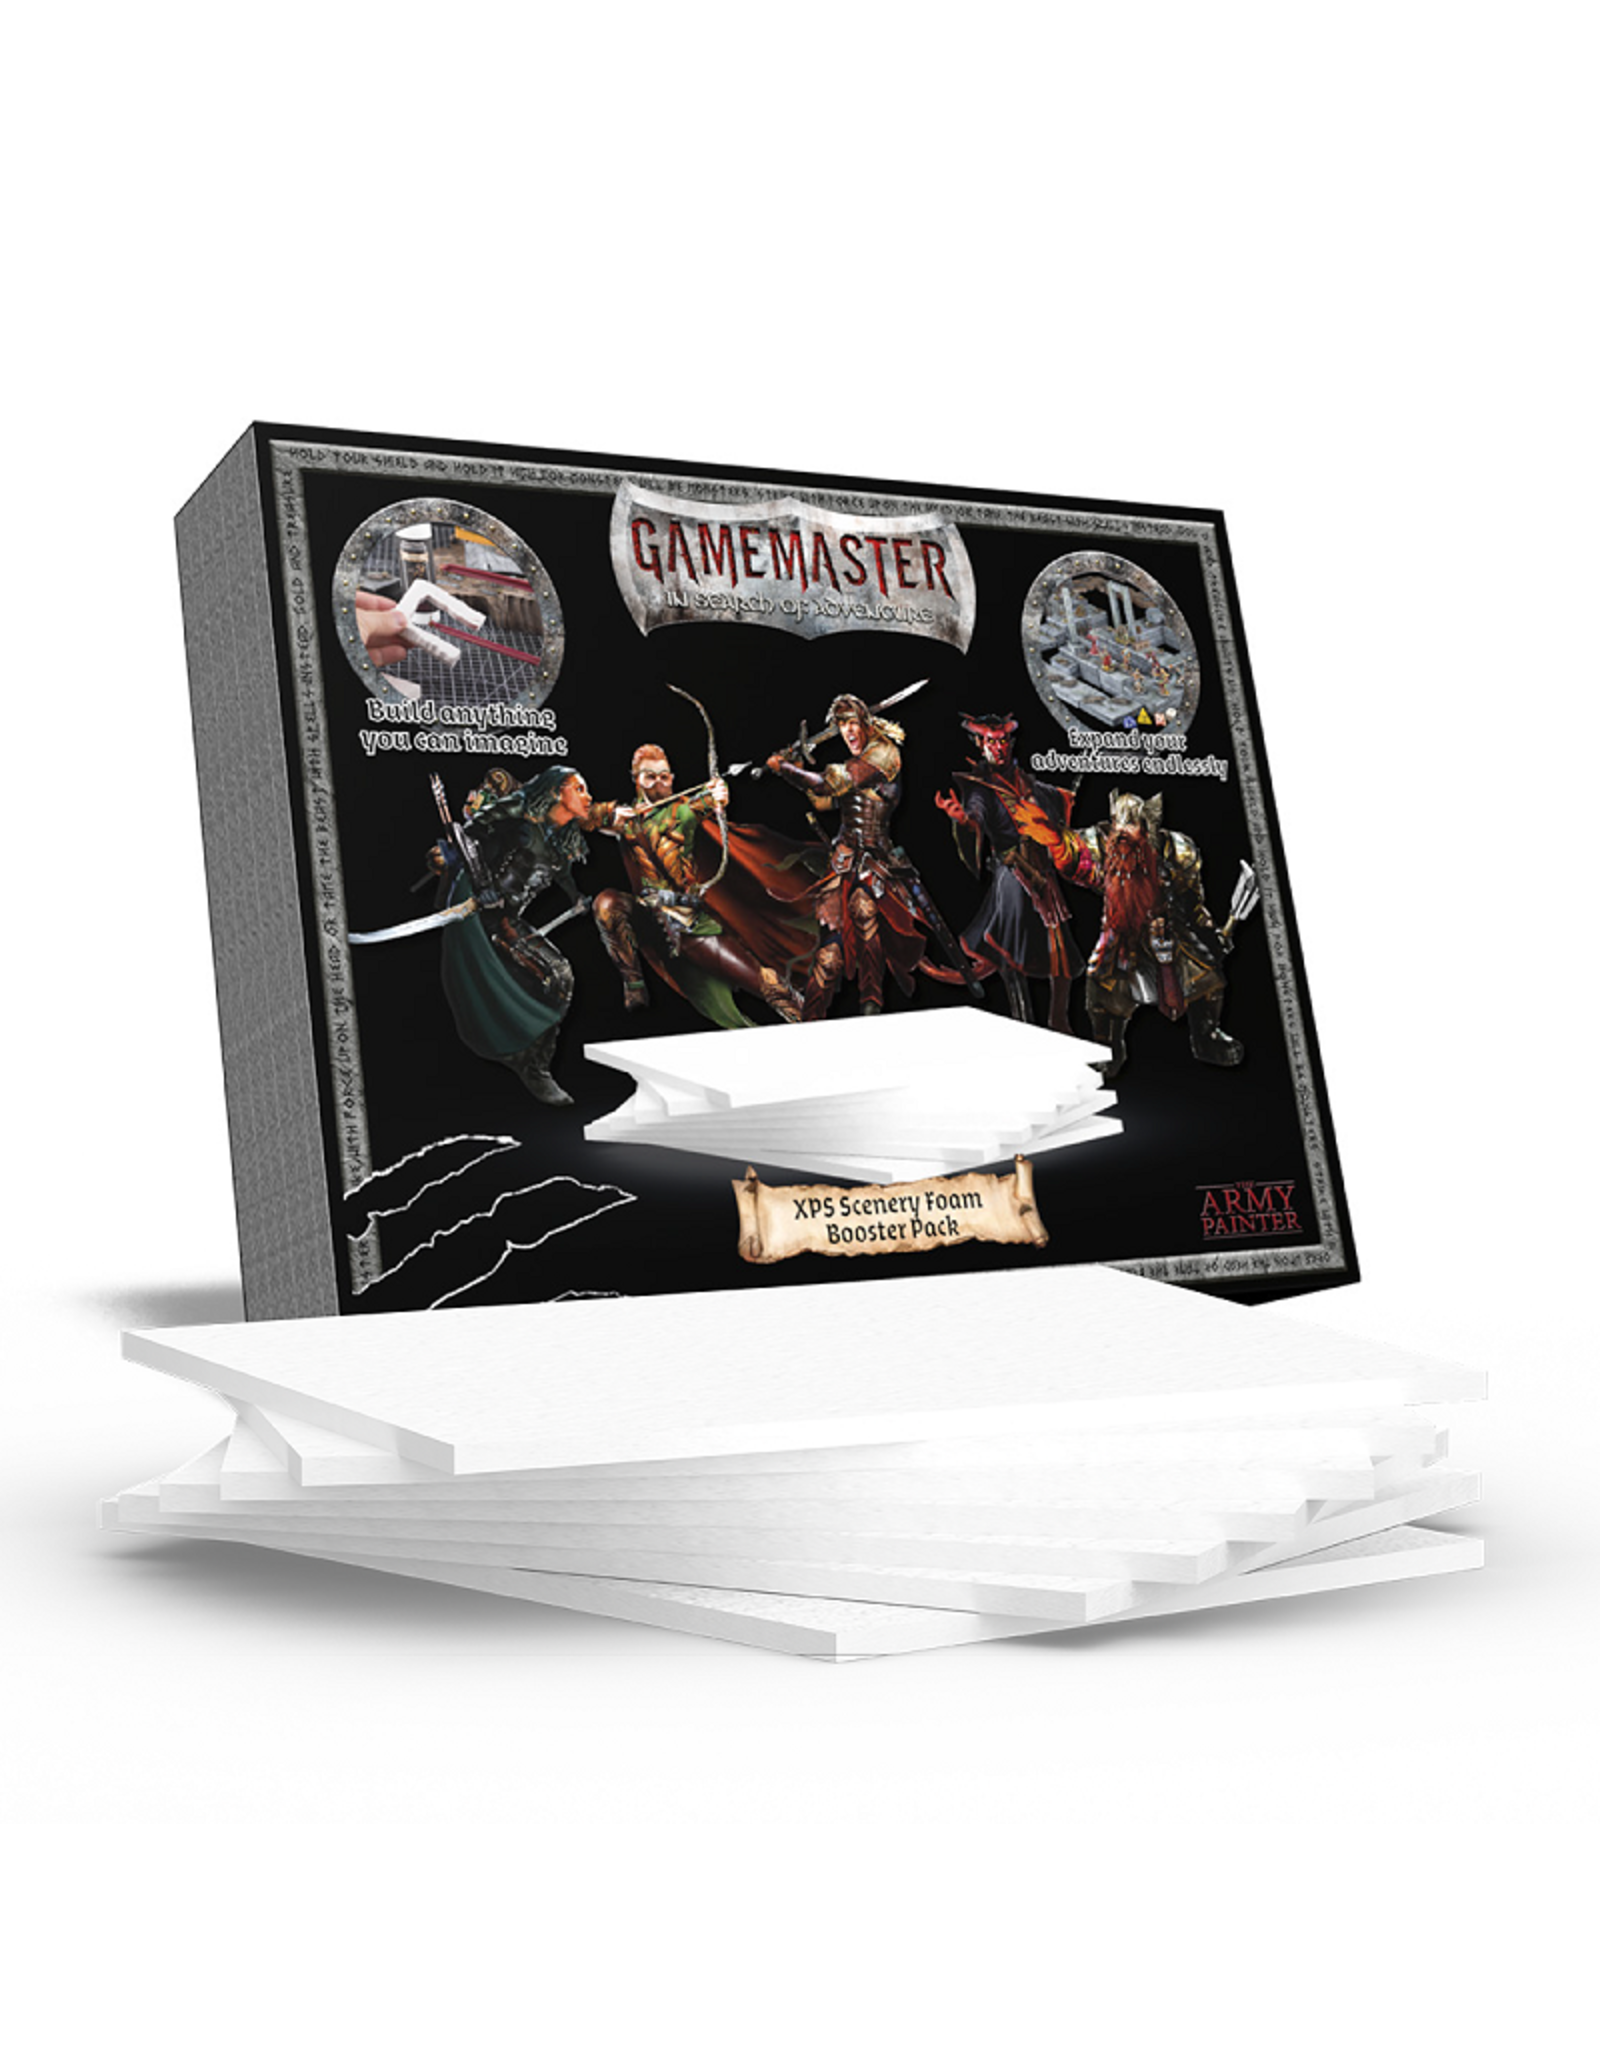 Army Painter Gamemaster: Xps Scenery Foam Booster Pack